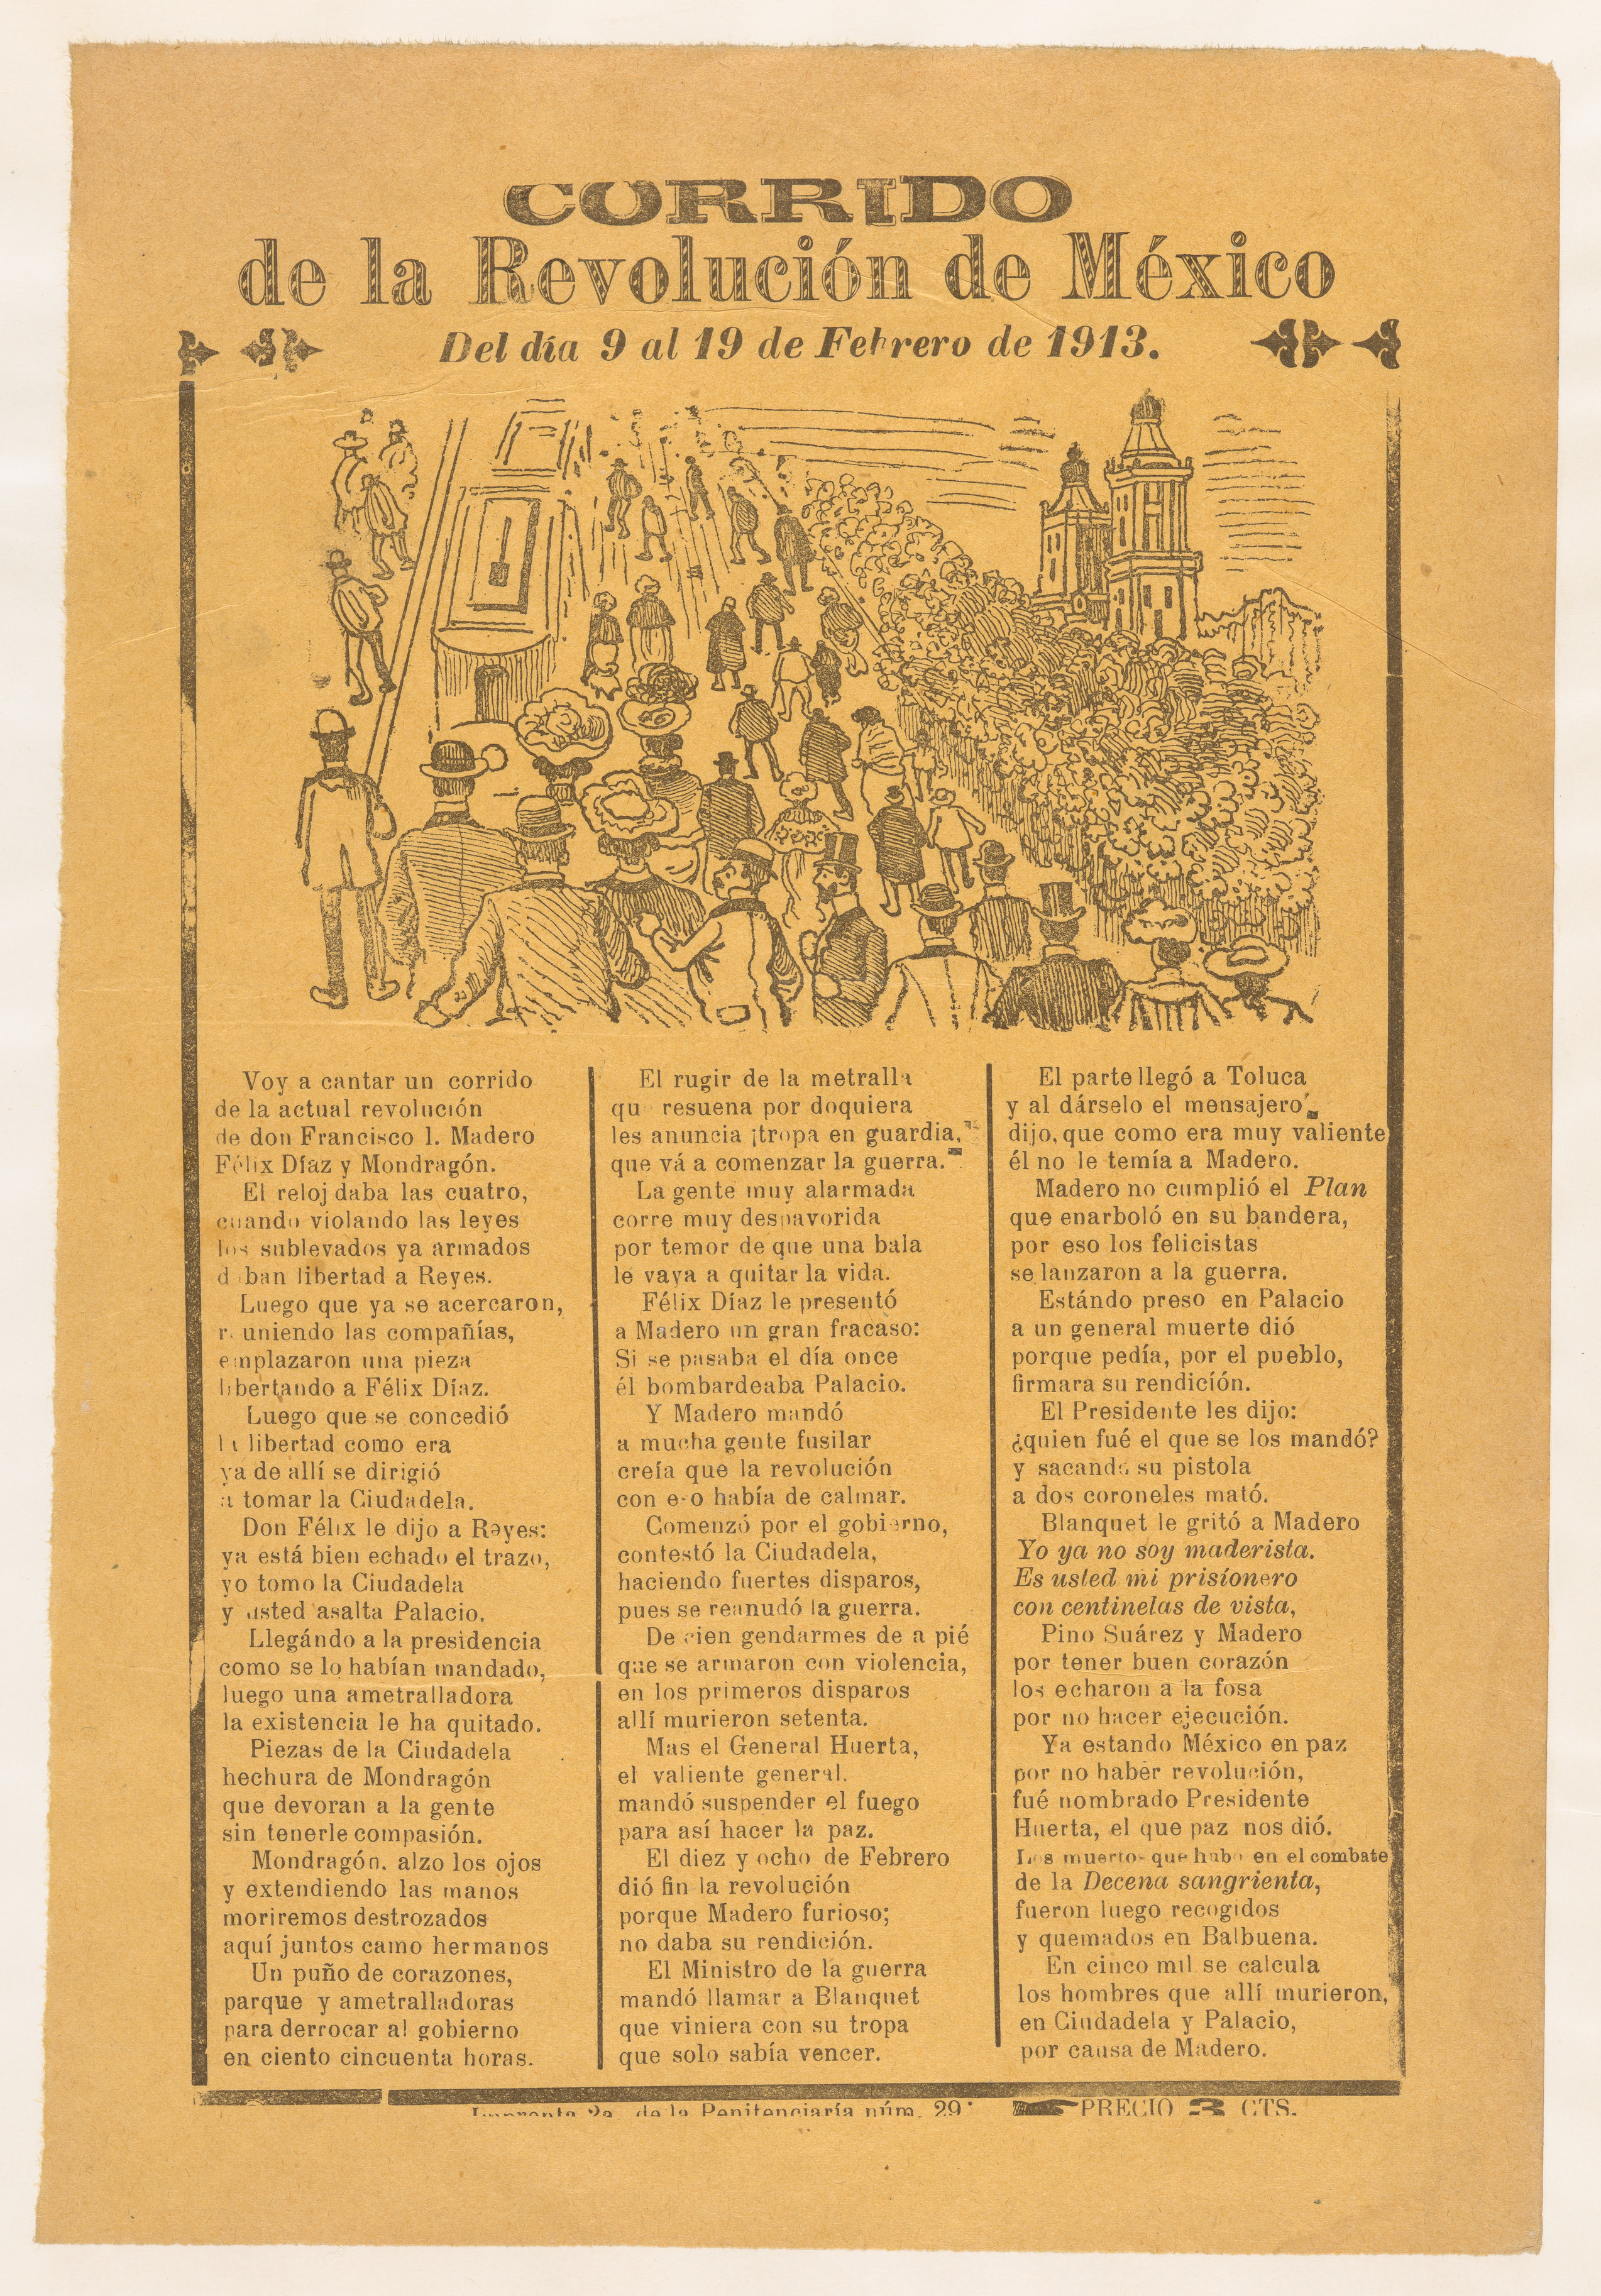 José Guadalupe Posada, Broadsheet relating to the apparition of a comet in  Mexico in November 1899, and the words to a song 'La Paloma Azul